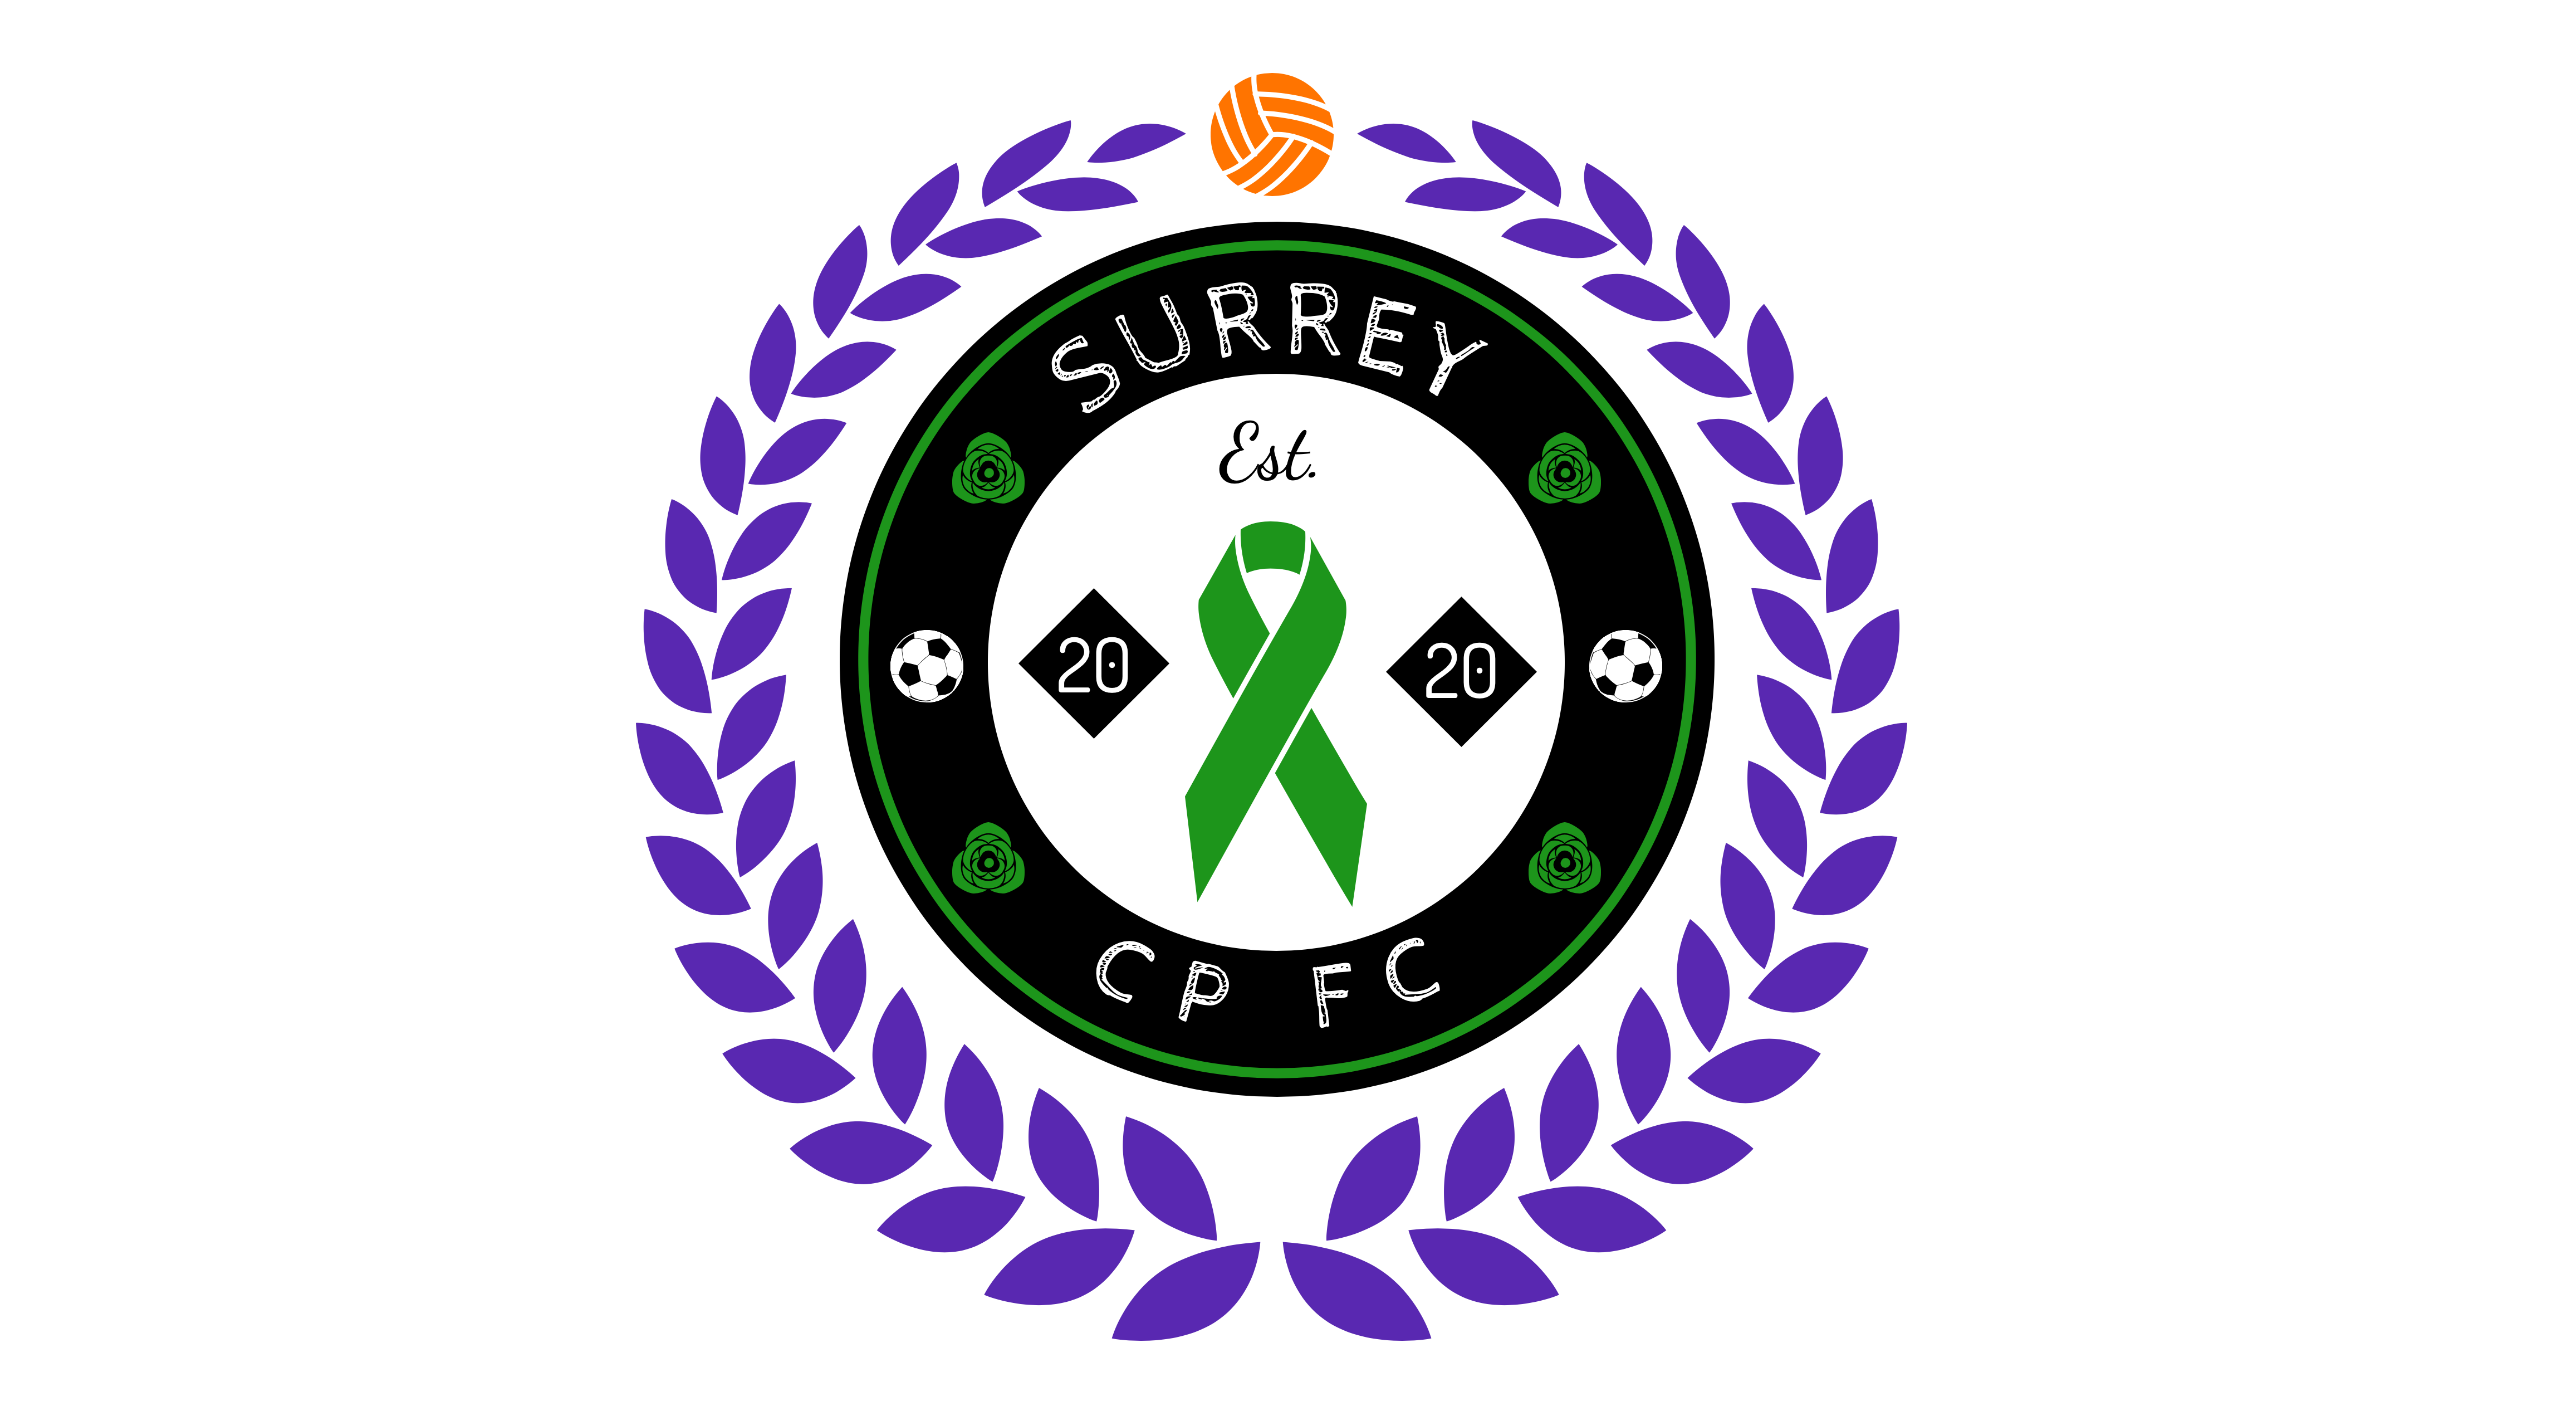 Club badge with green ribbon representing Cerbral Palsy